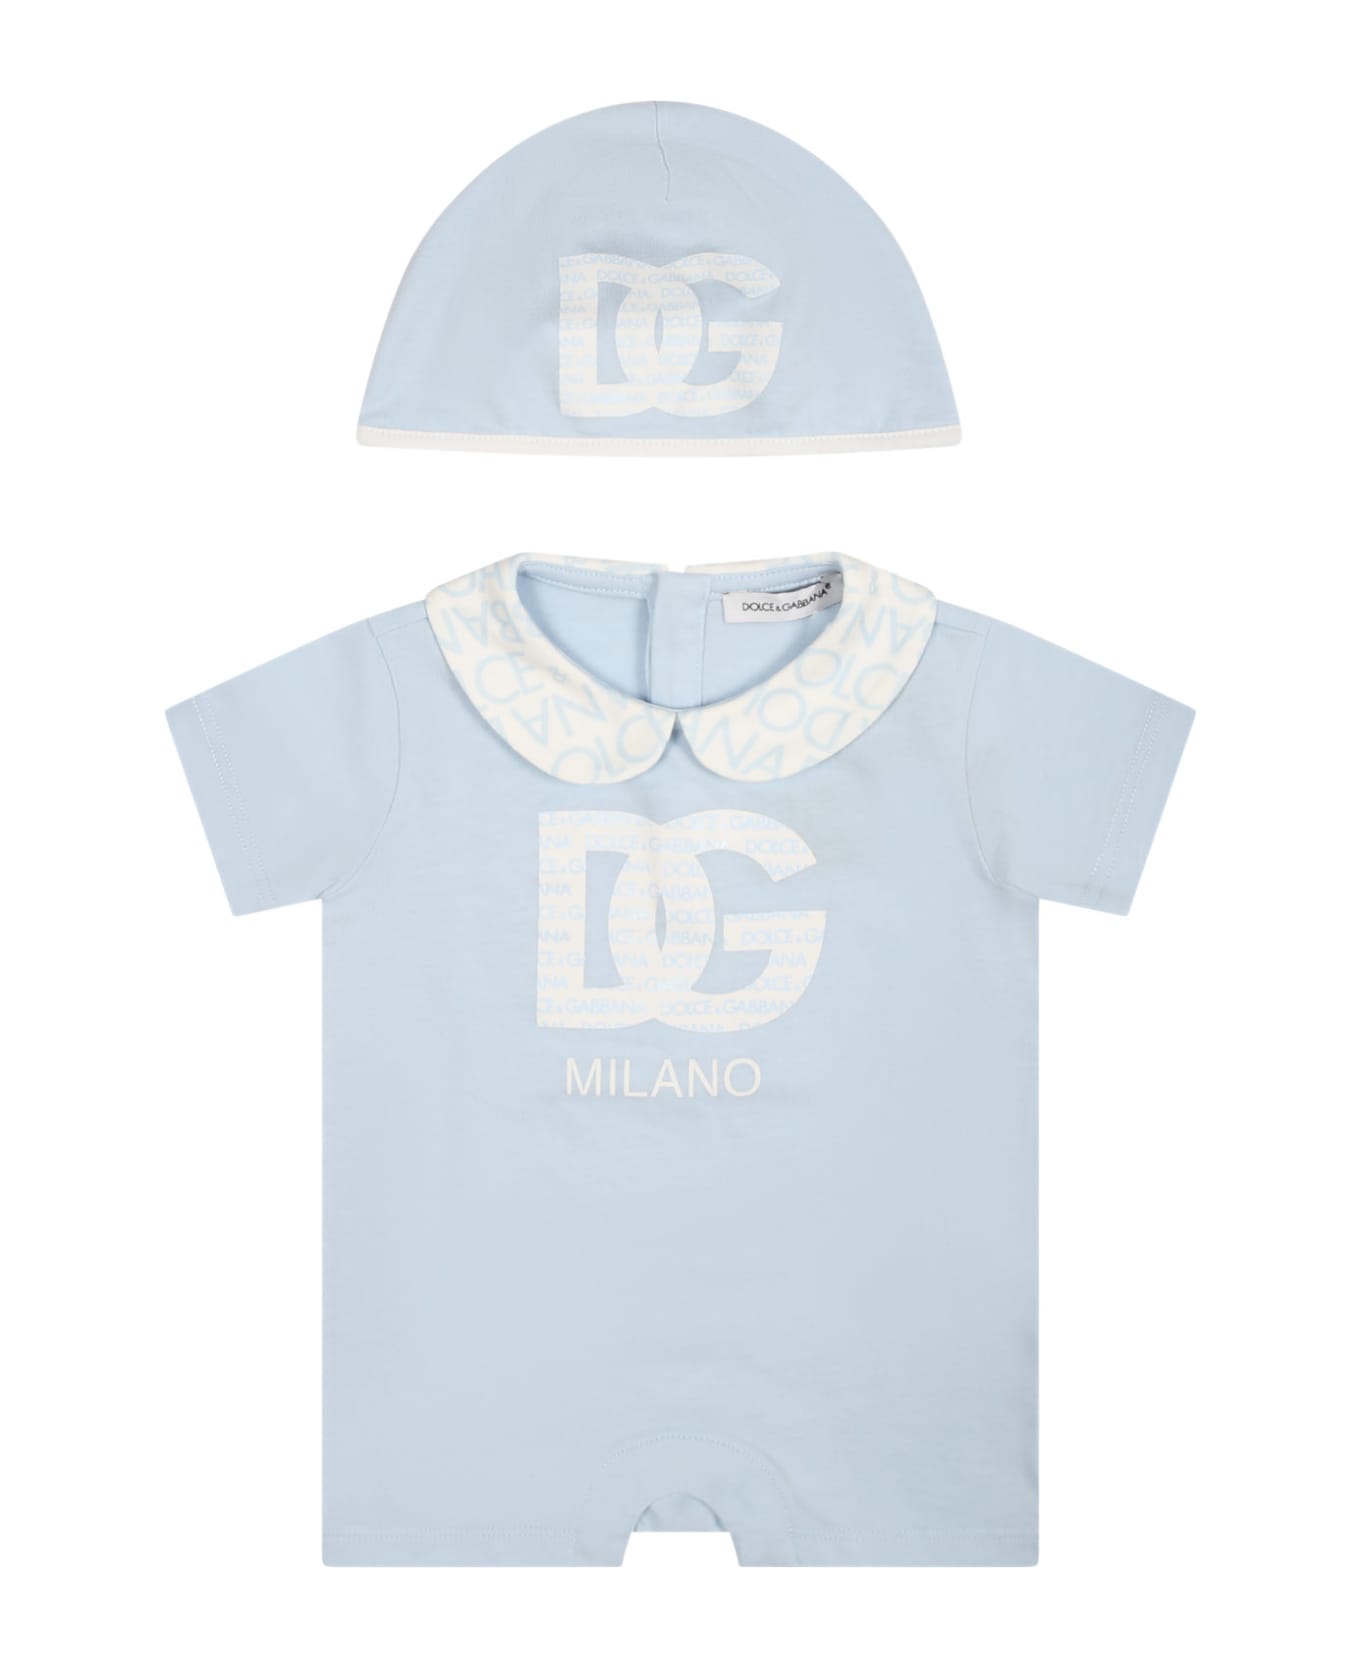 Dolce & Gabbana Light Blue Romper Suit For Baby Boy With Logo - Light Blue ボディスーツ＆セットアップ